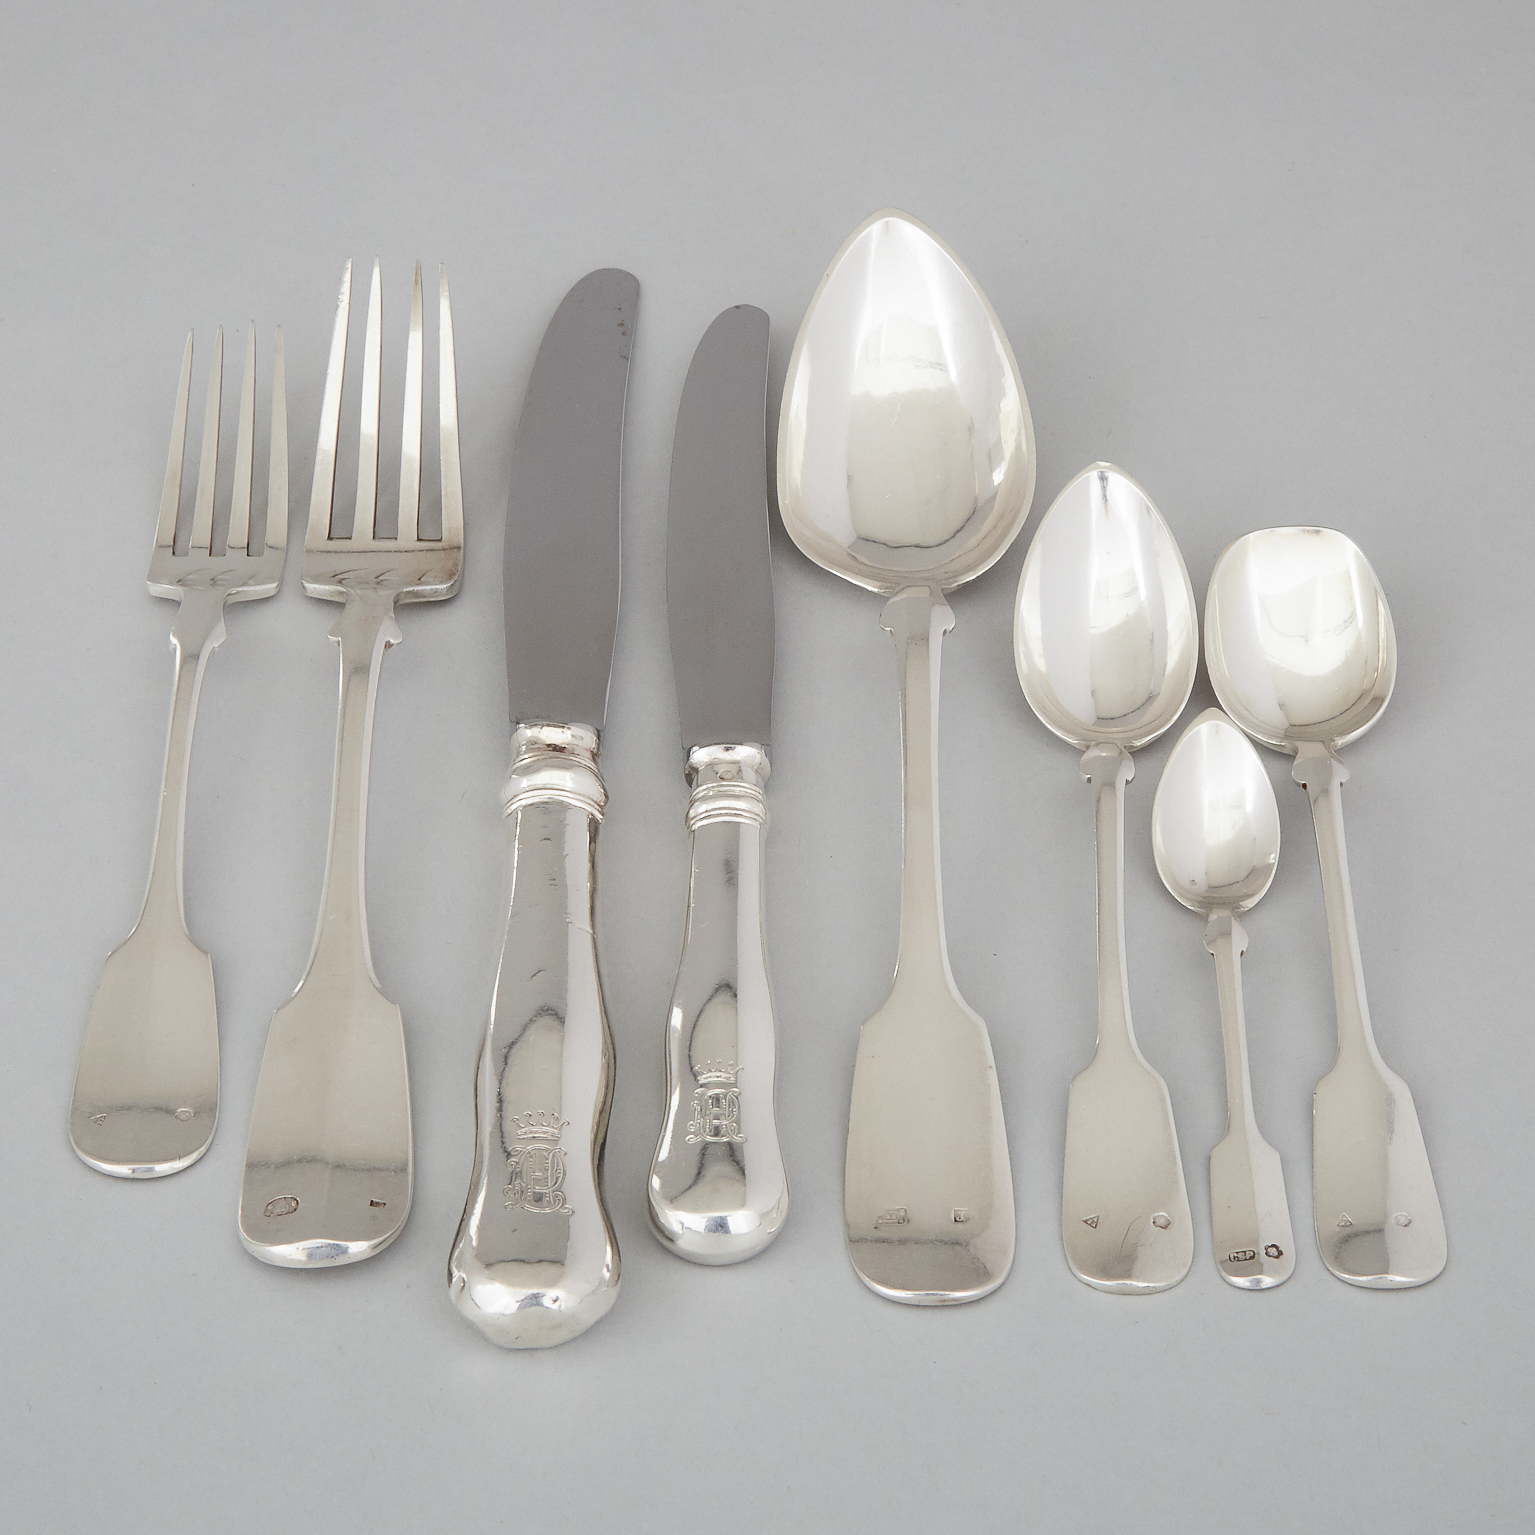 Assembled Austro-Hungarian Silver Fiddle Pattern Flatware Service, mid-19th century